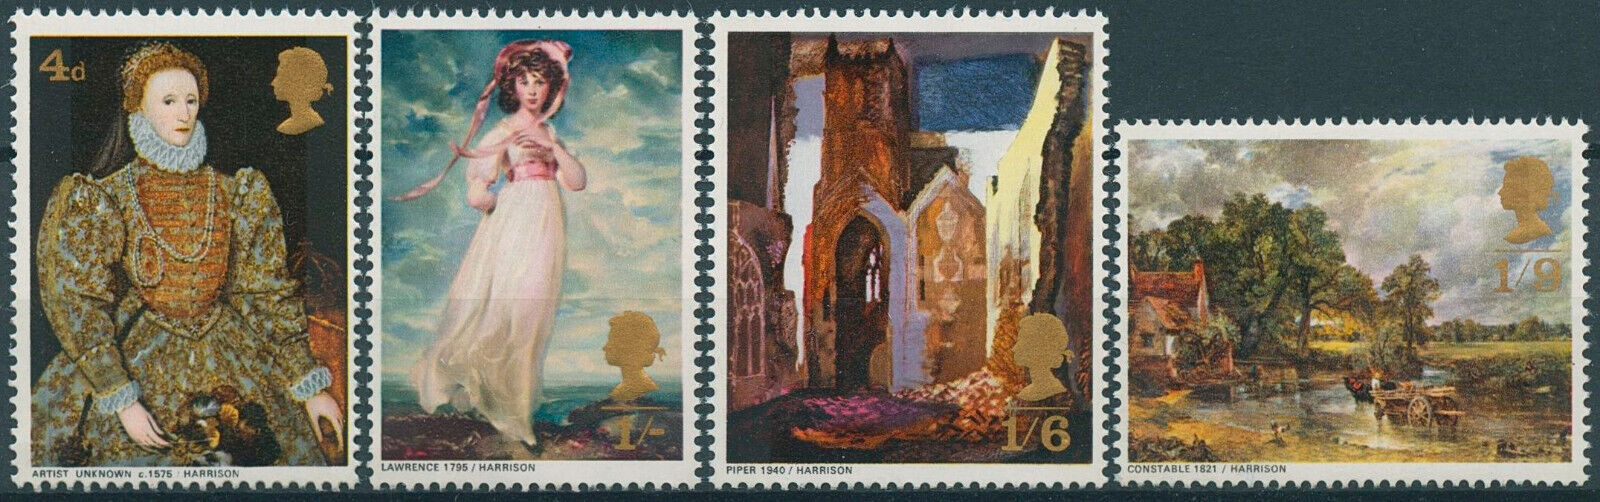 GB 1968 MNH Art Stamps British Paintings Lawrence Piper Constable 4v Set